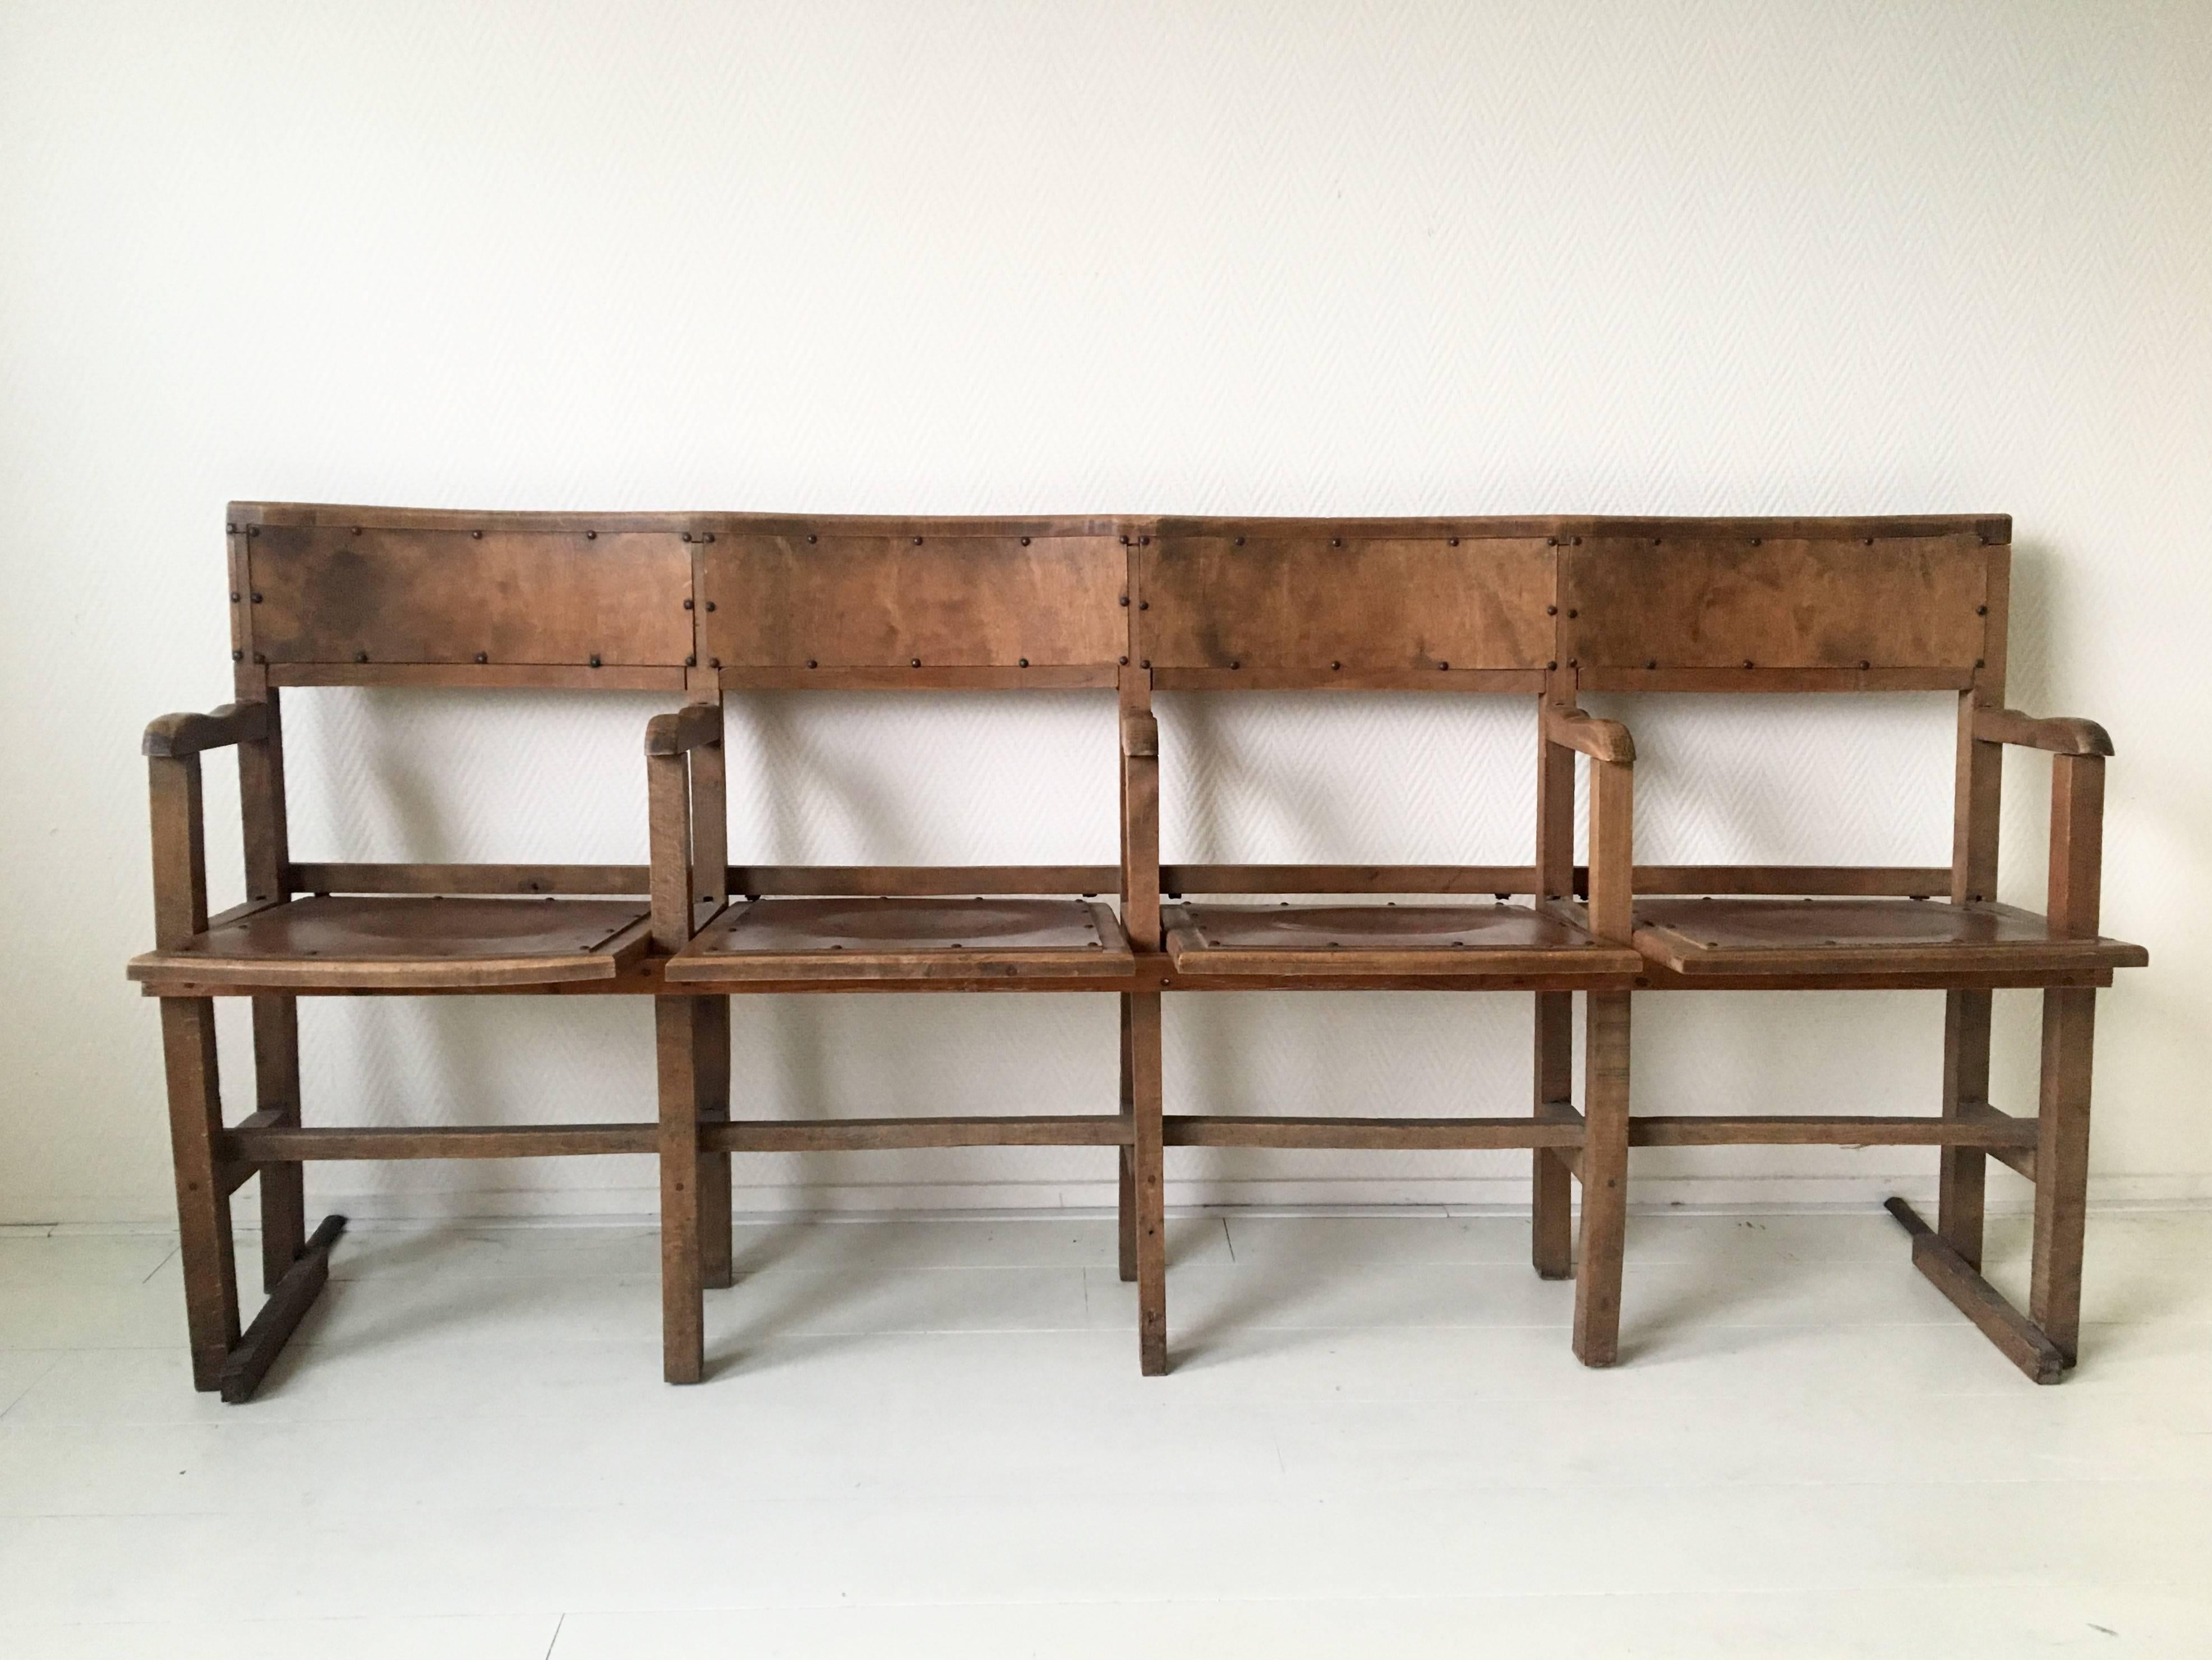 This Industrial bench was made from wood or plywood. It features elegant imprinting’s on the seating’s which are adjusted to the frame with nails. This bench is in good and completely original condition with some signs of age and use. Also some old